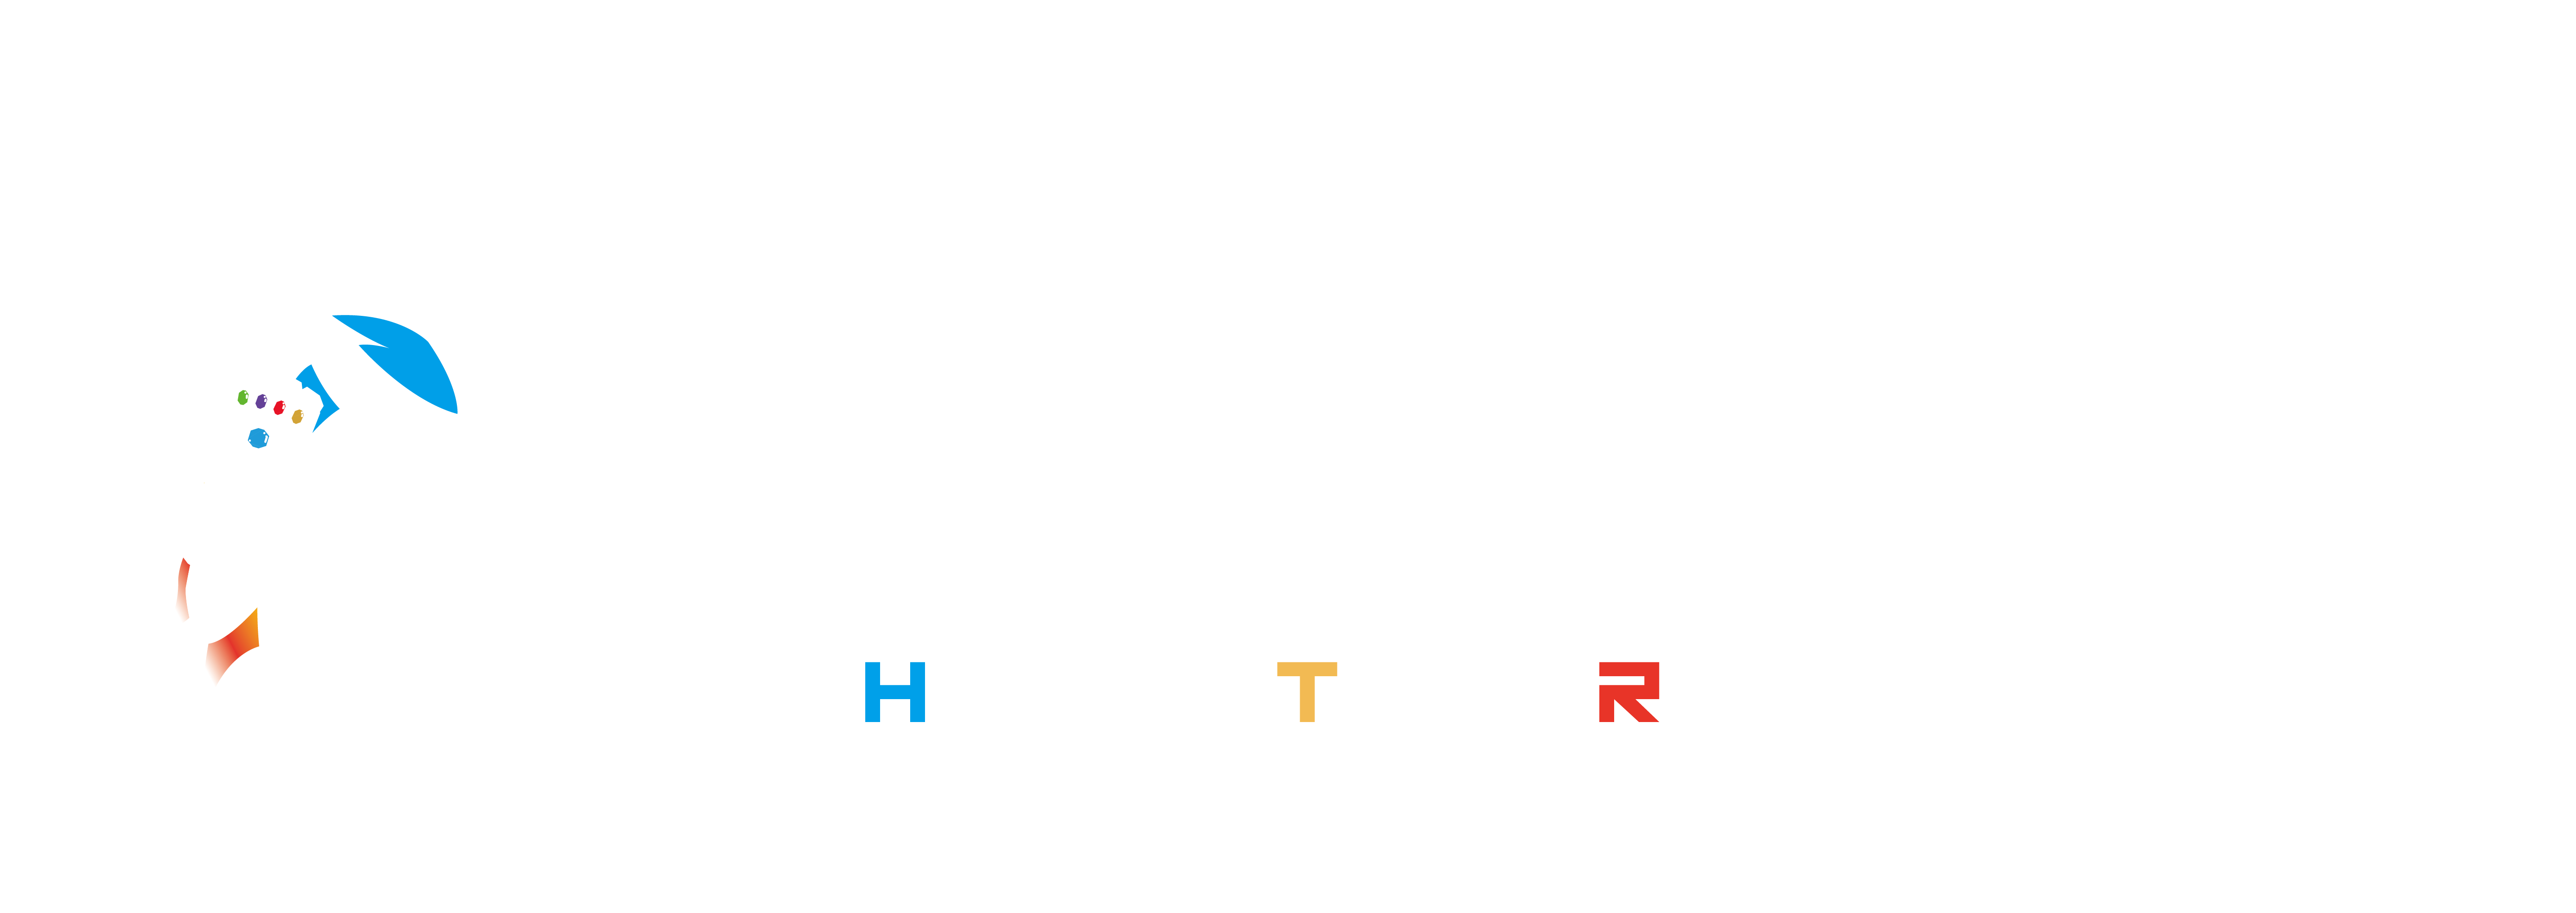 https://raw.githubusercontent.com/verd1c/ctf-writeups/master/real-world/2023/clone-and-pwn/non-heavy-ftp/img/feature.png